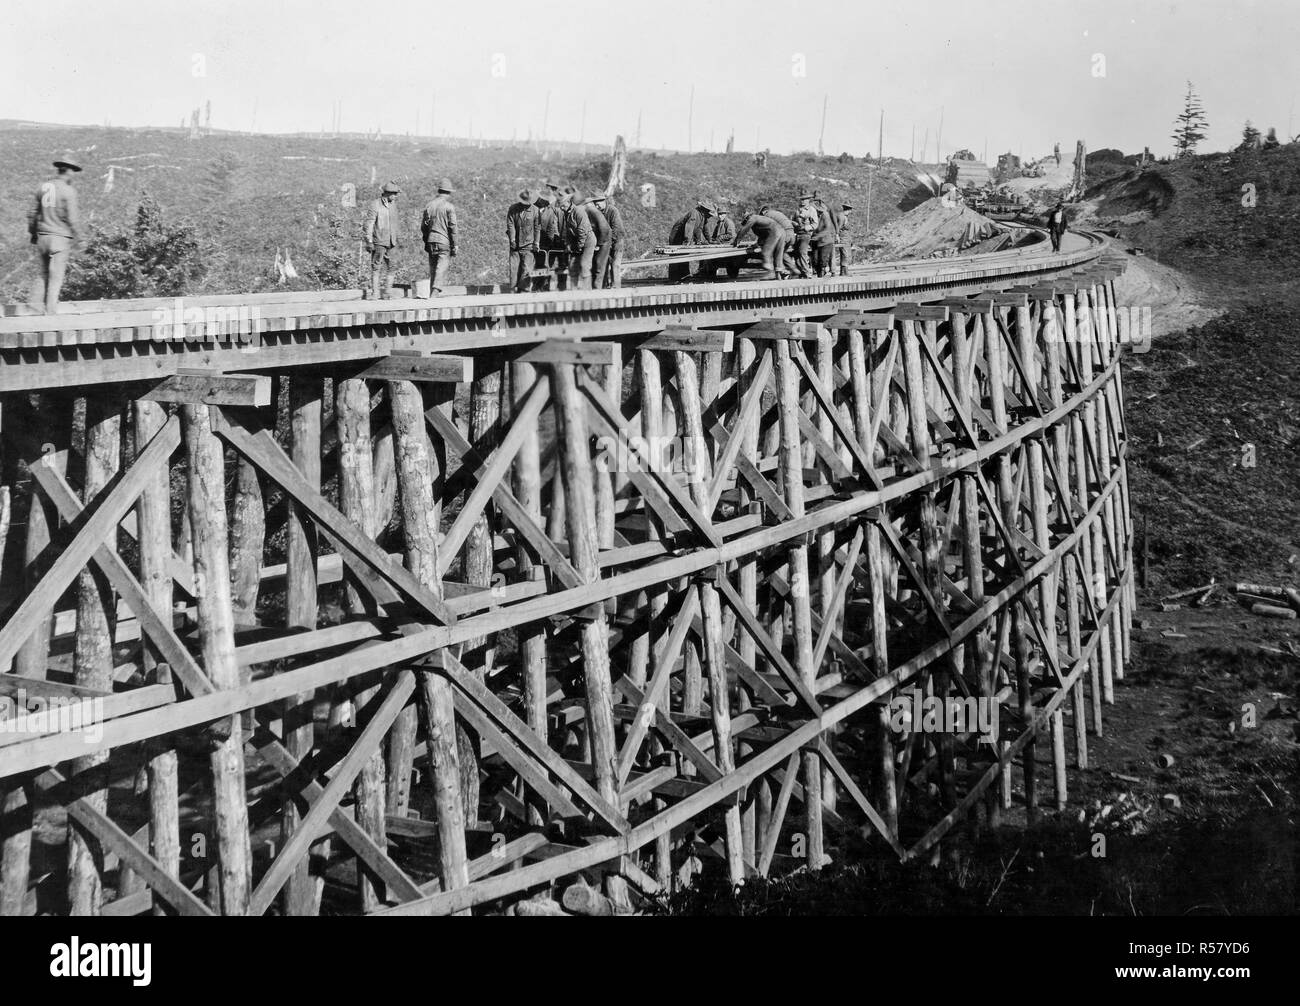 Industries of War - Lumbering - TRACK LAYING ON LINE SOUTH near Beaver Creek, rail laying from hand car on bridge ca. 1915-1920 Stock Photo